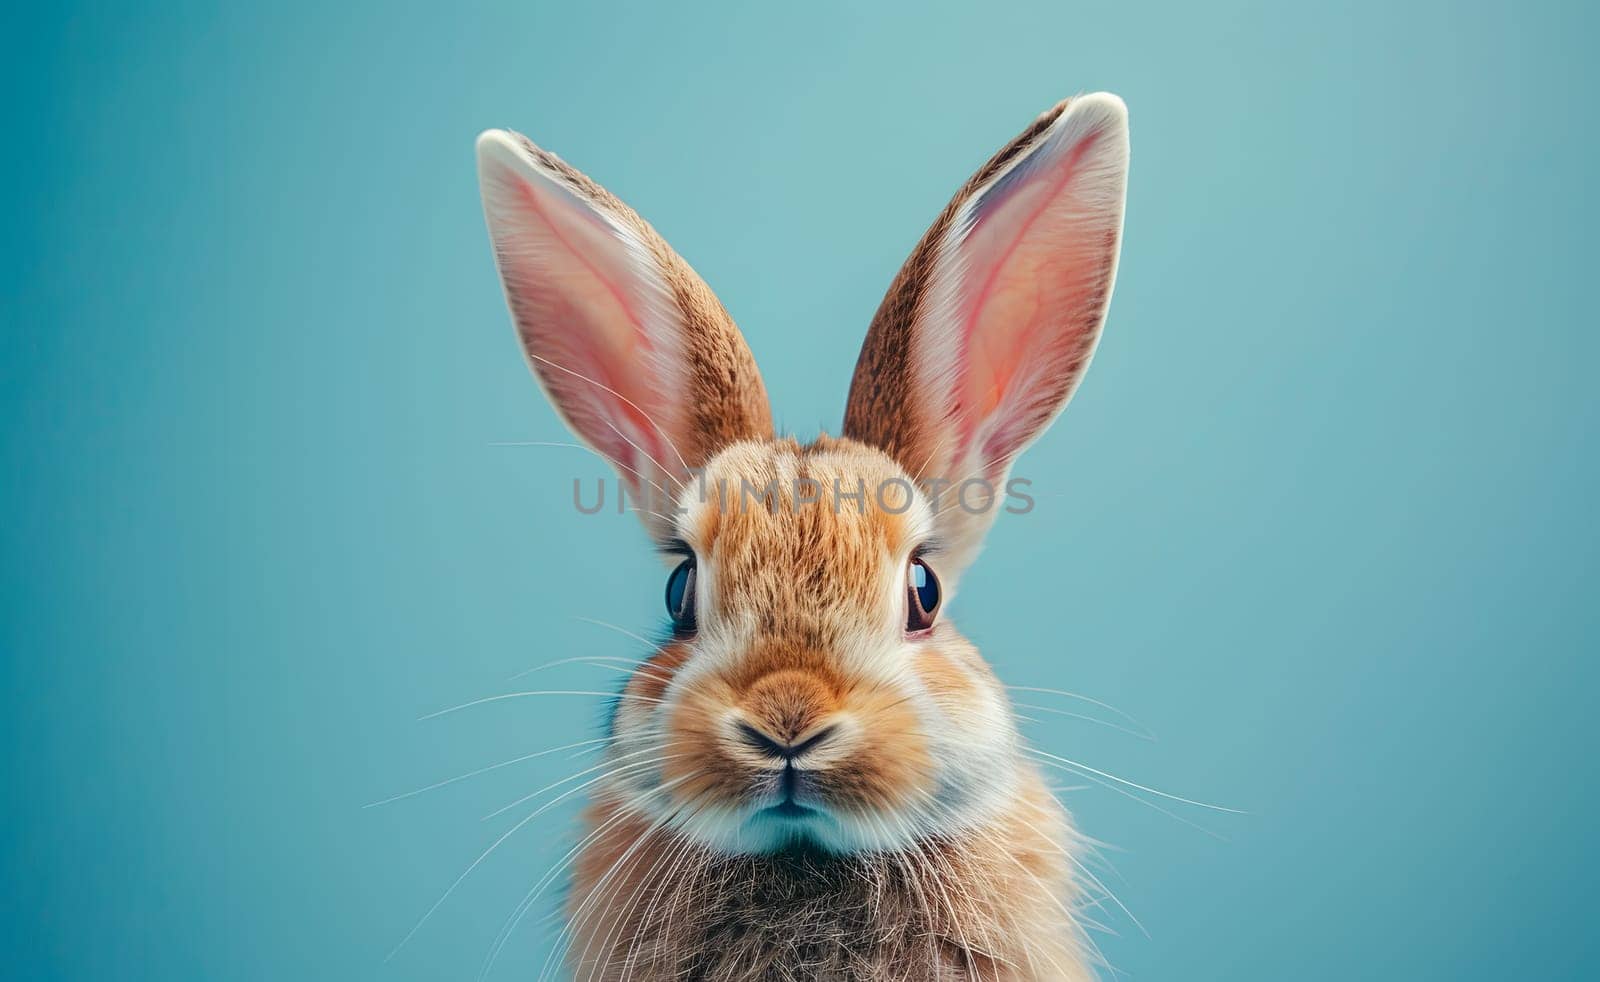 A brown rabbit with large ears posing on blue background by Nadtochiy